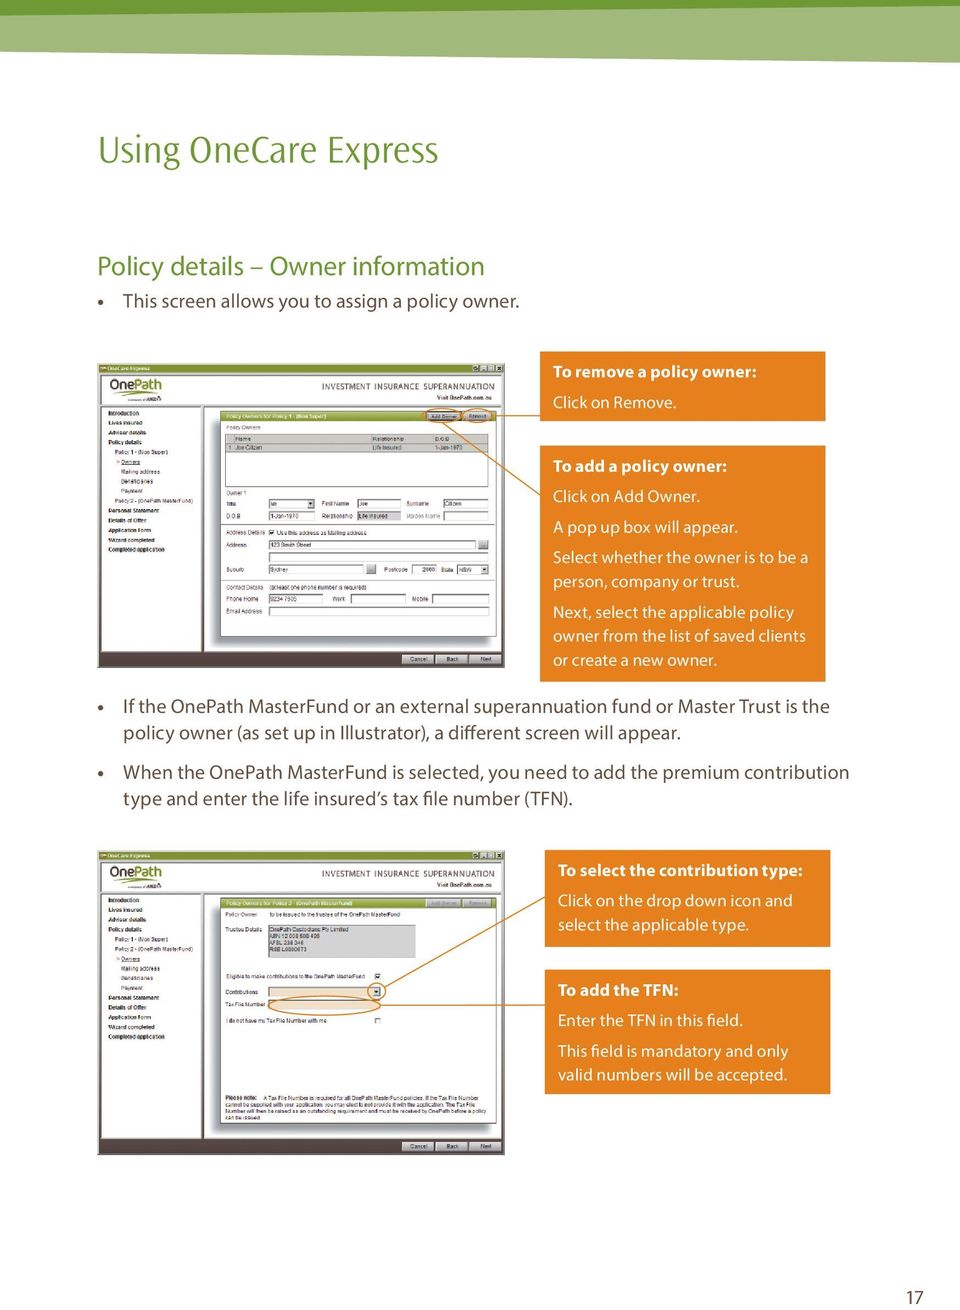 If the OnePath MasterFund or an external superannuation fund or Master Trust is the policy owner (as set up in Illustrator), a different screen will appear.